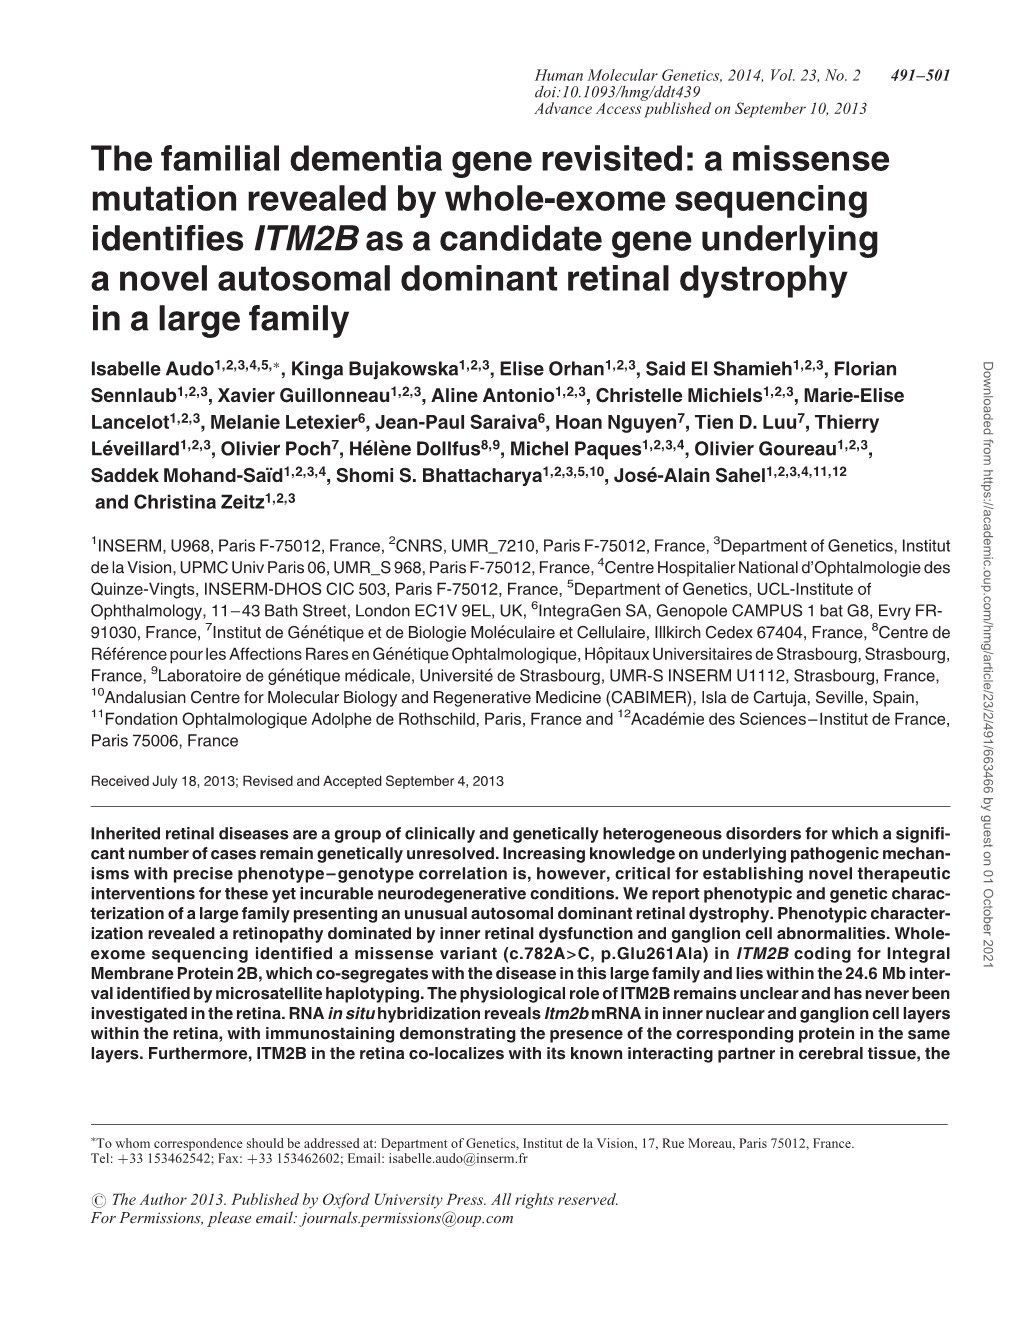 The Familial Dementia Gene Revisited: a Missense Mutation Revealed By